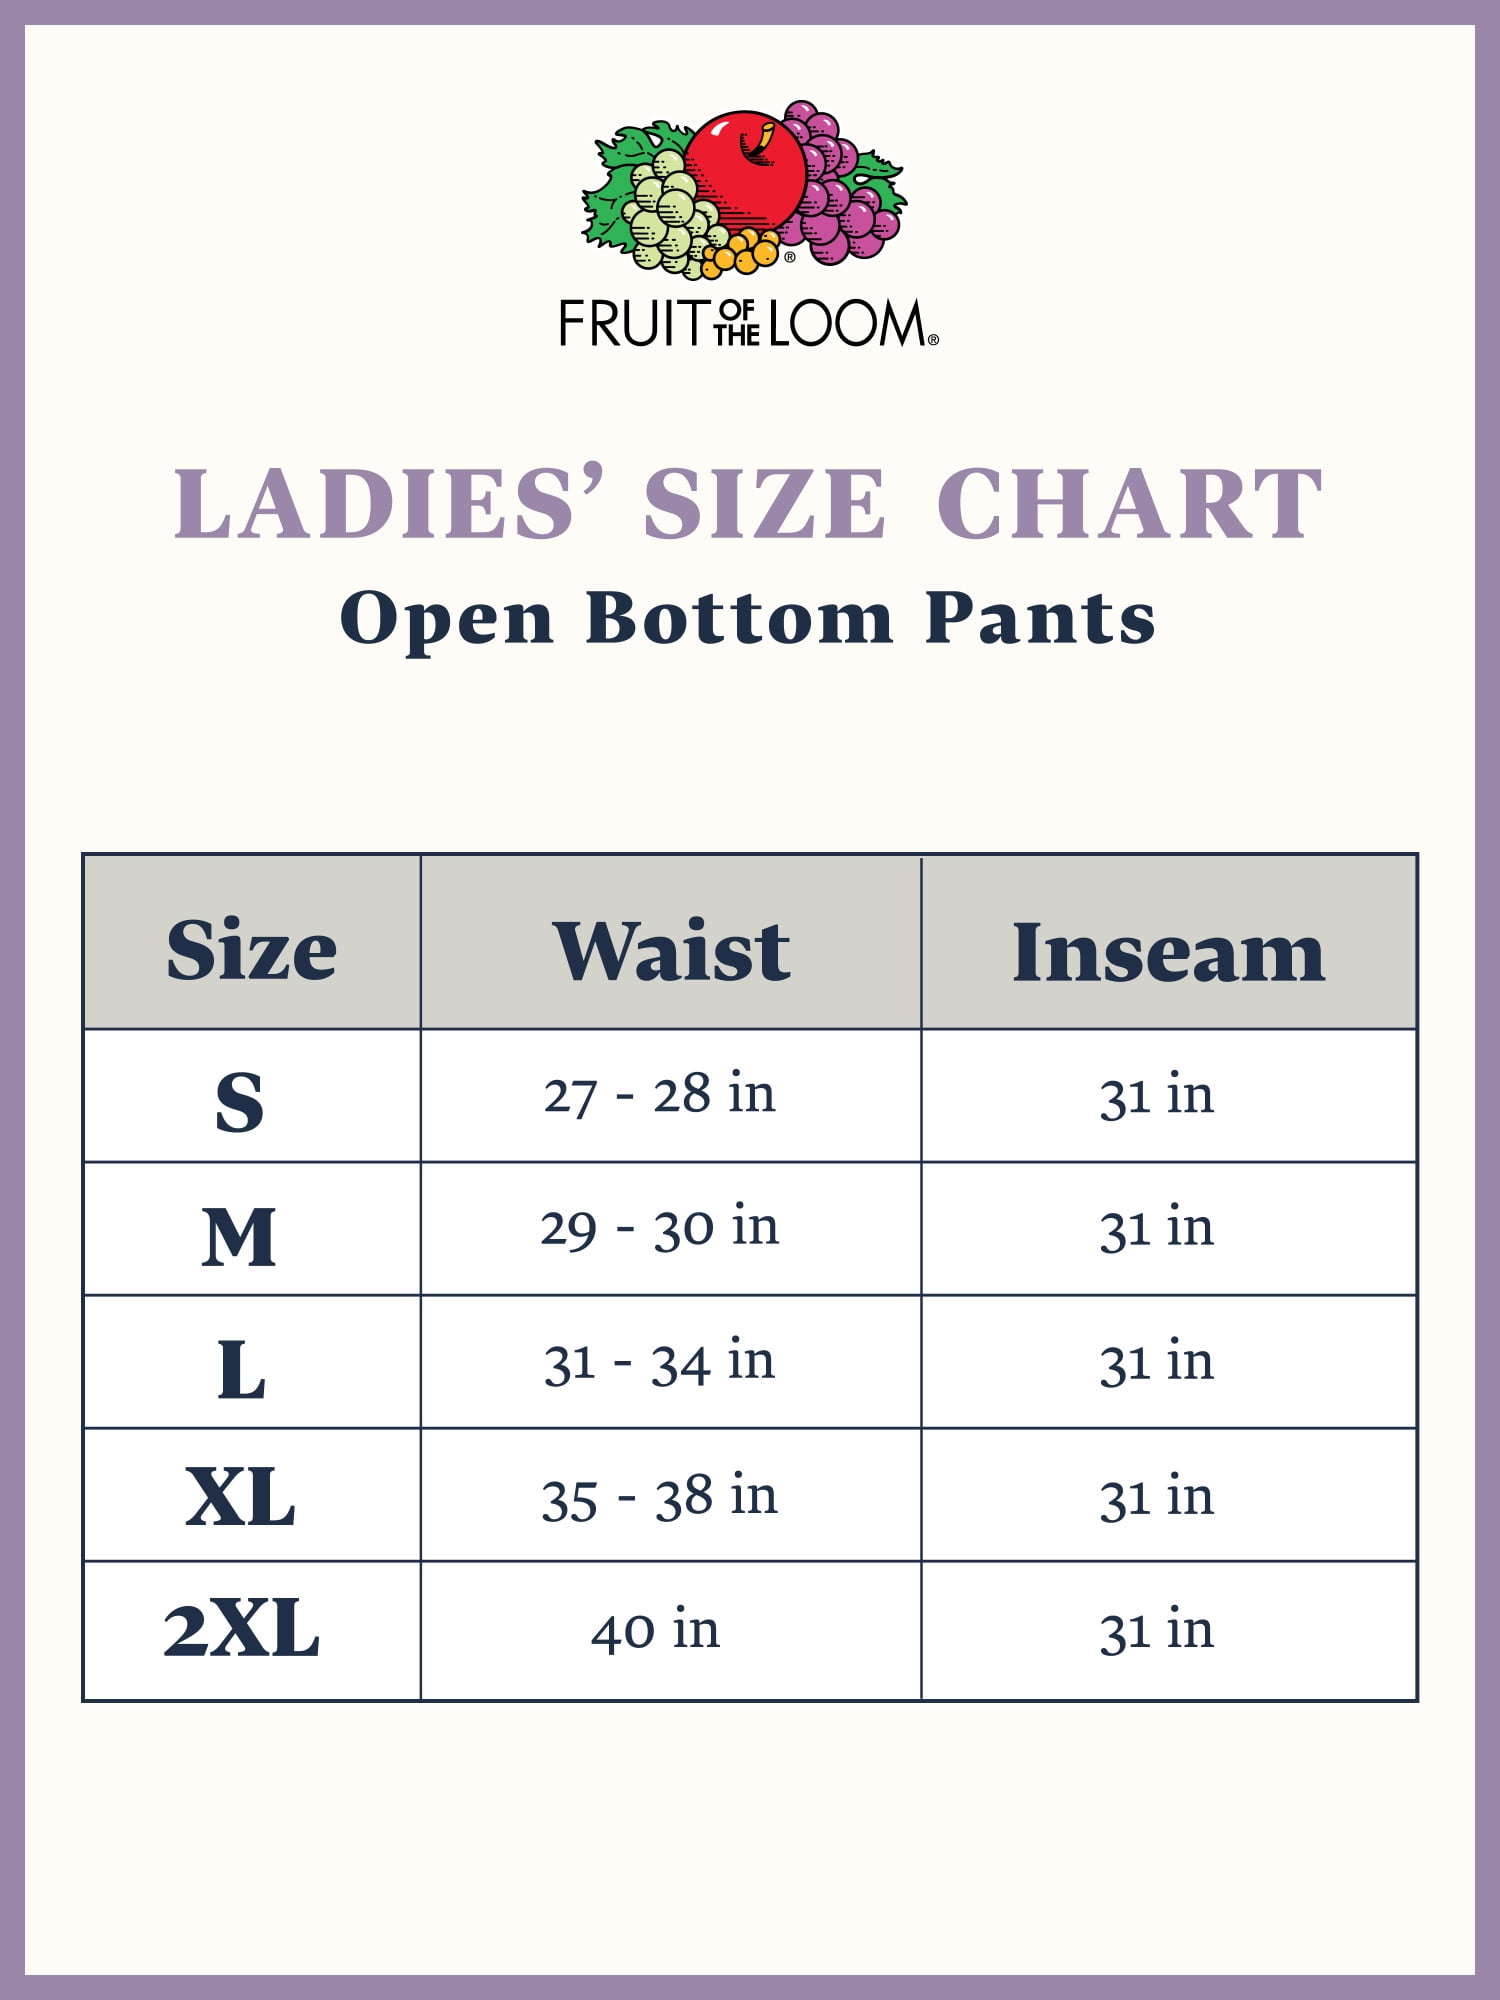 Wire Loom Size Chart